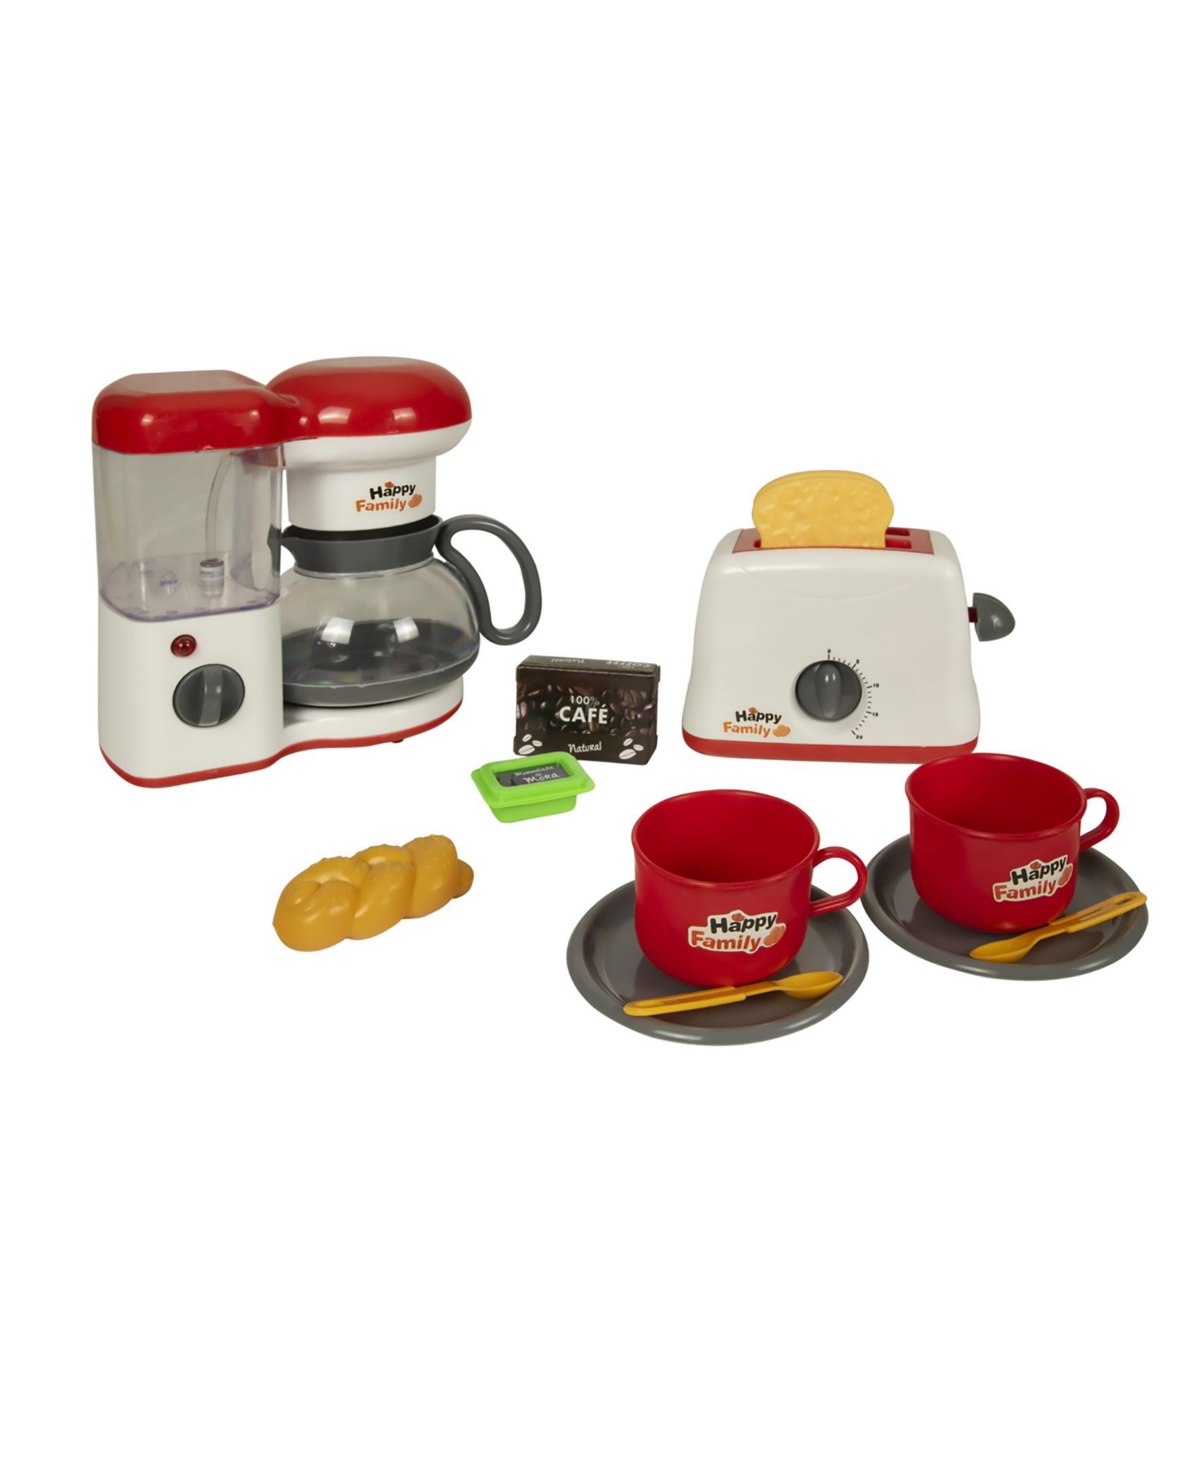 Dollar Queen Kids' Group Sales Deluxe Kitchen Play Set Coffee Maker And Toaster In Multi